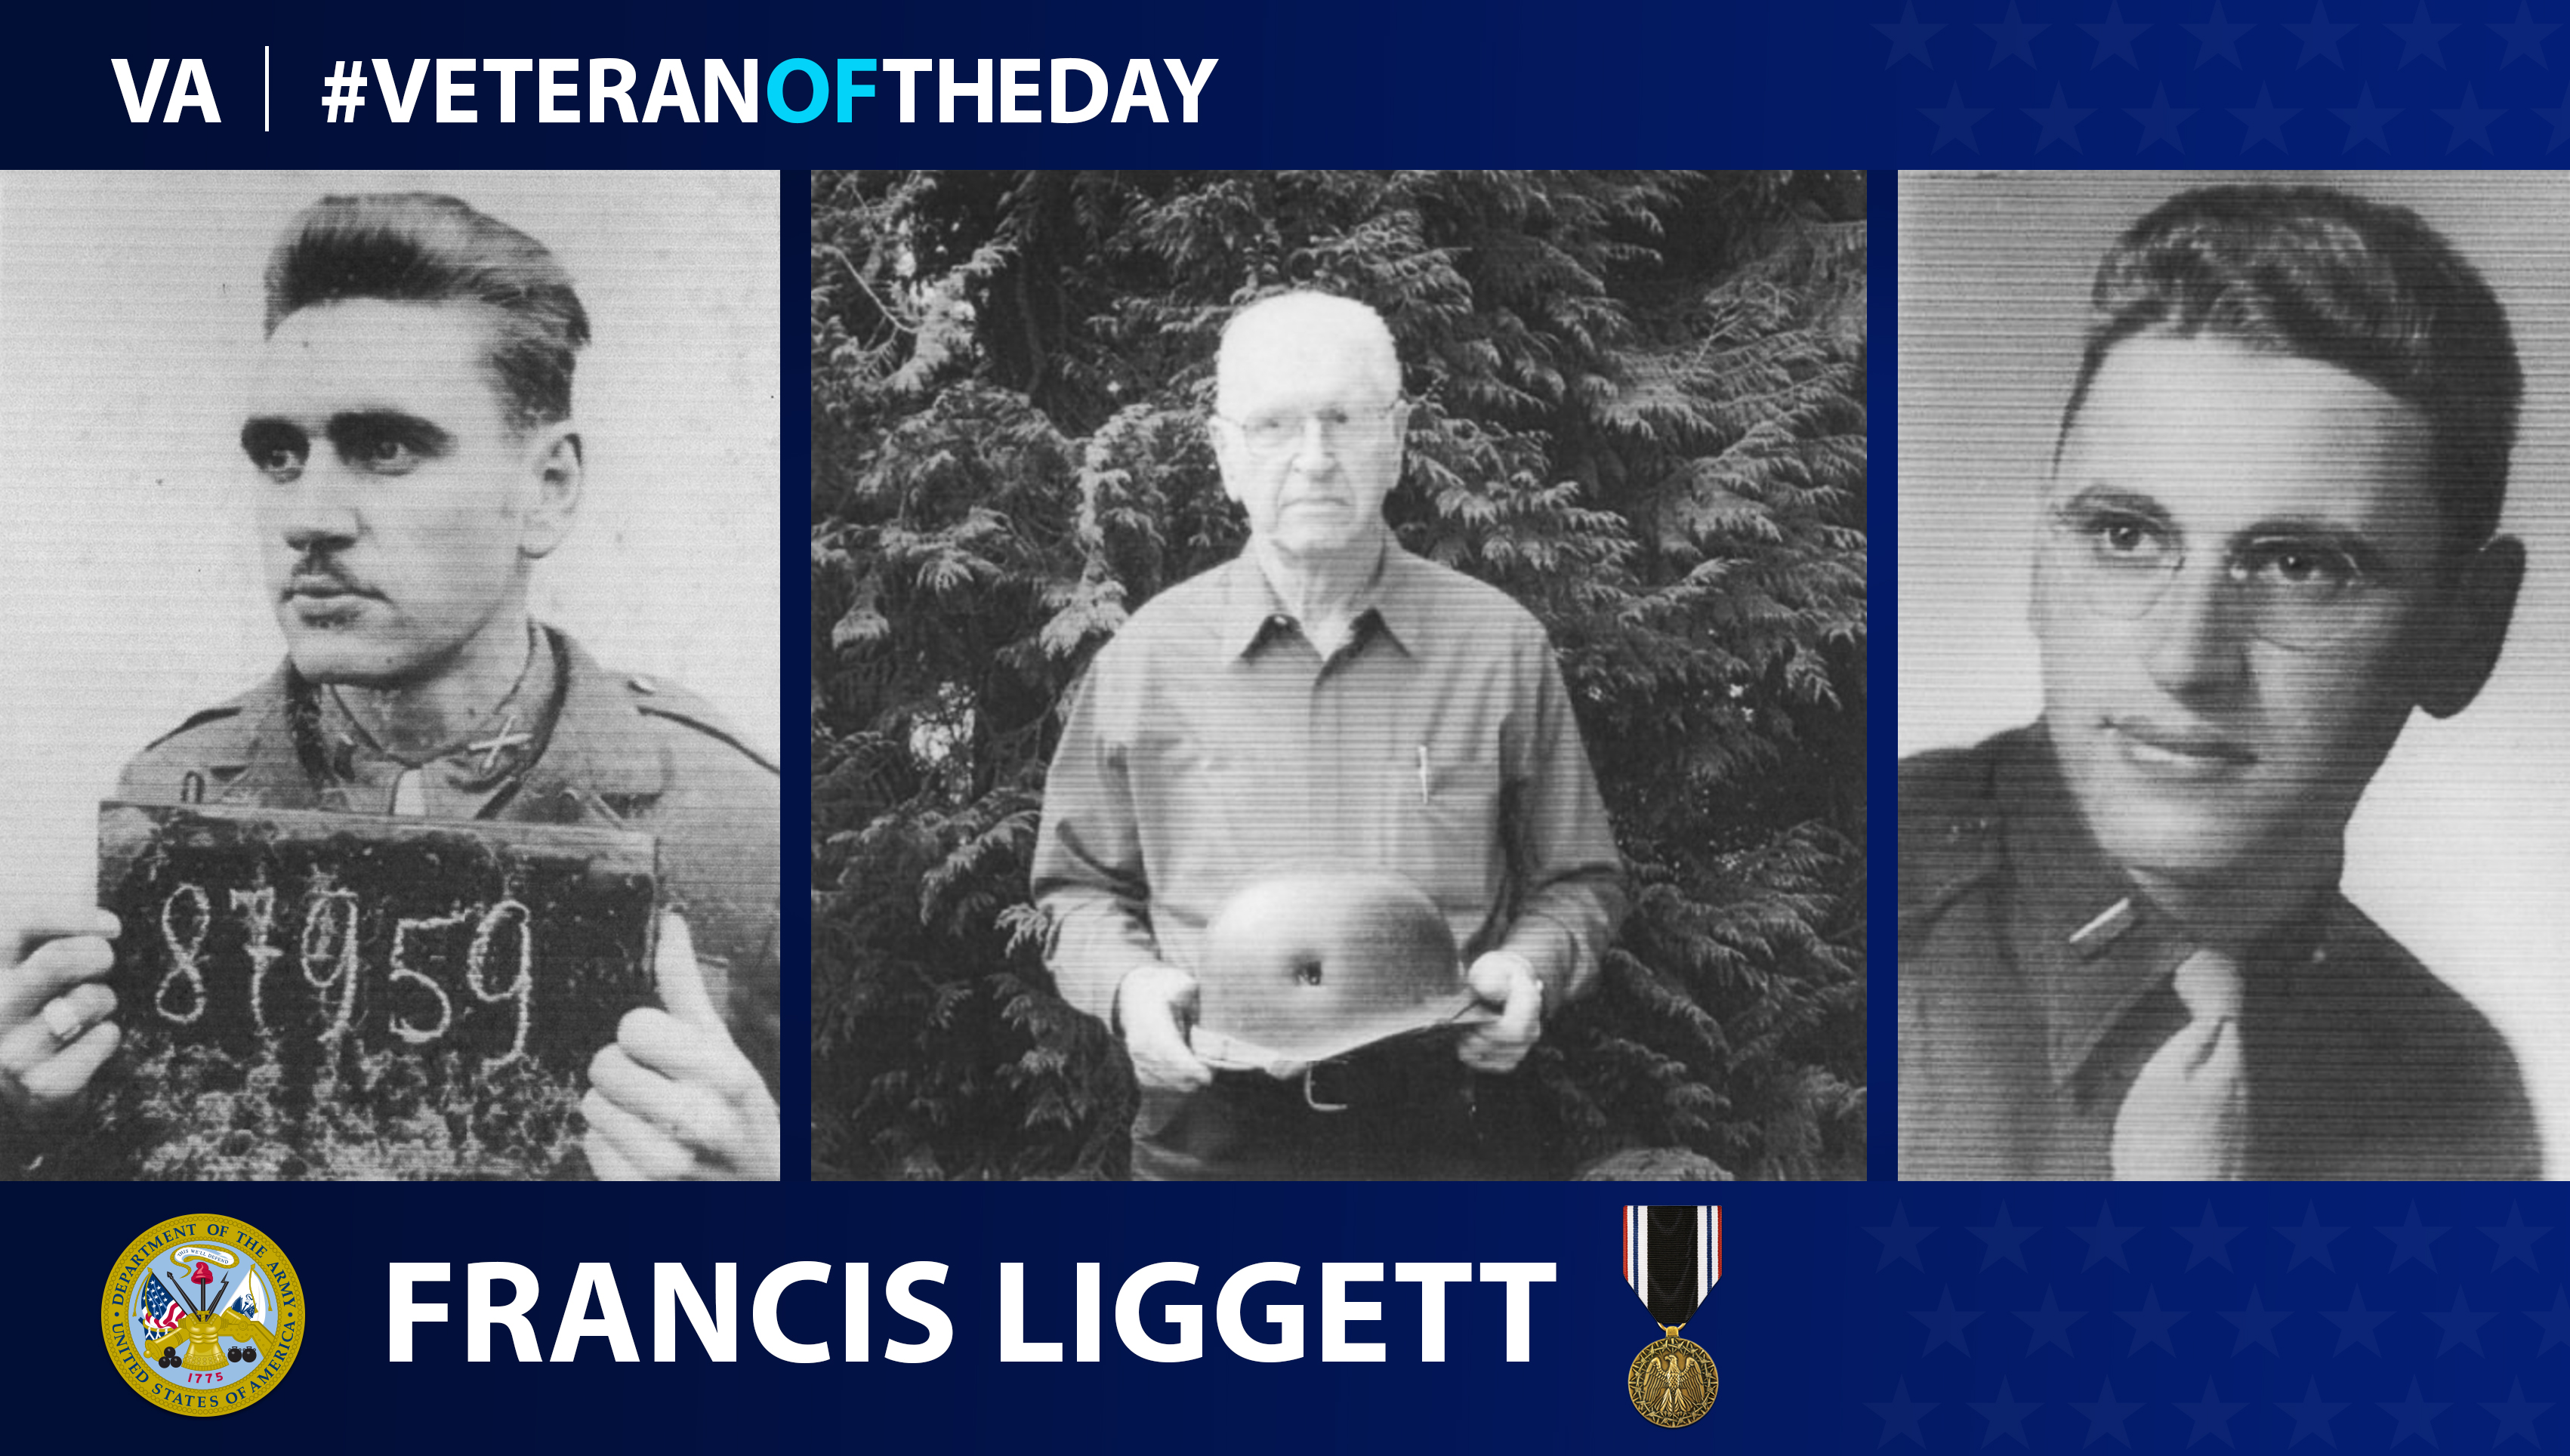 Army Veteran Francis Eugene Liggett is today's Veteran of the Day.